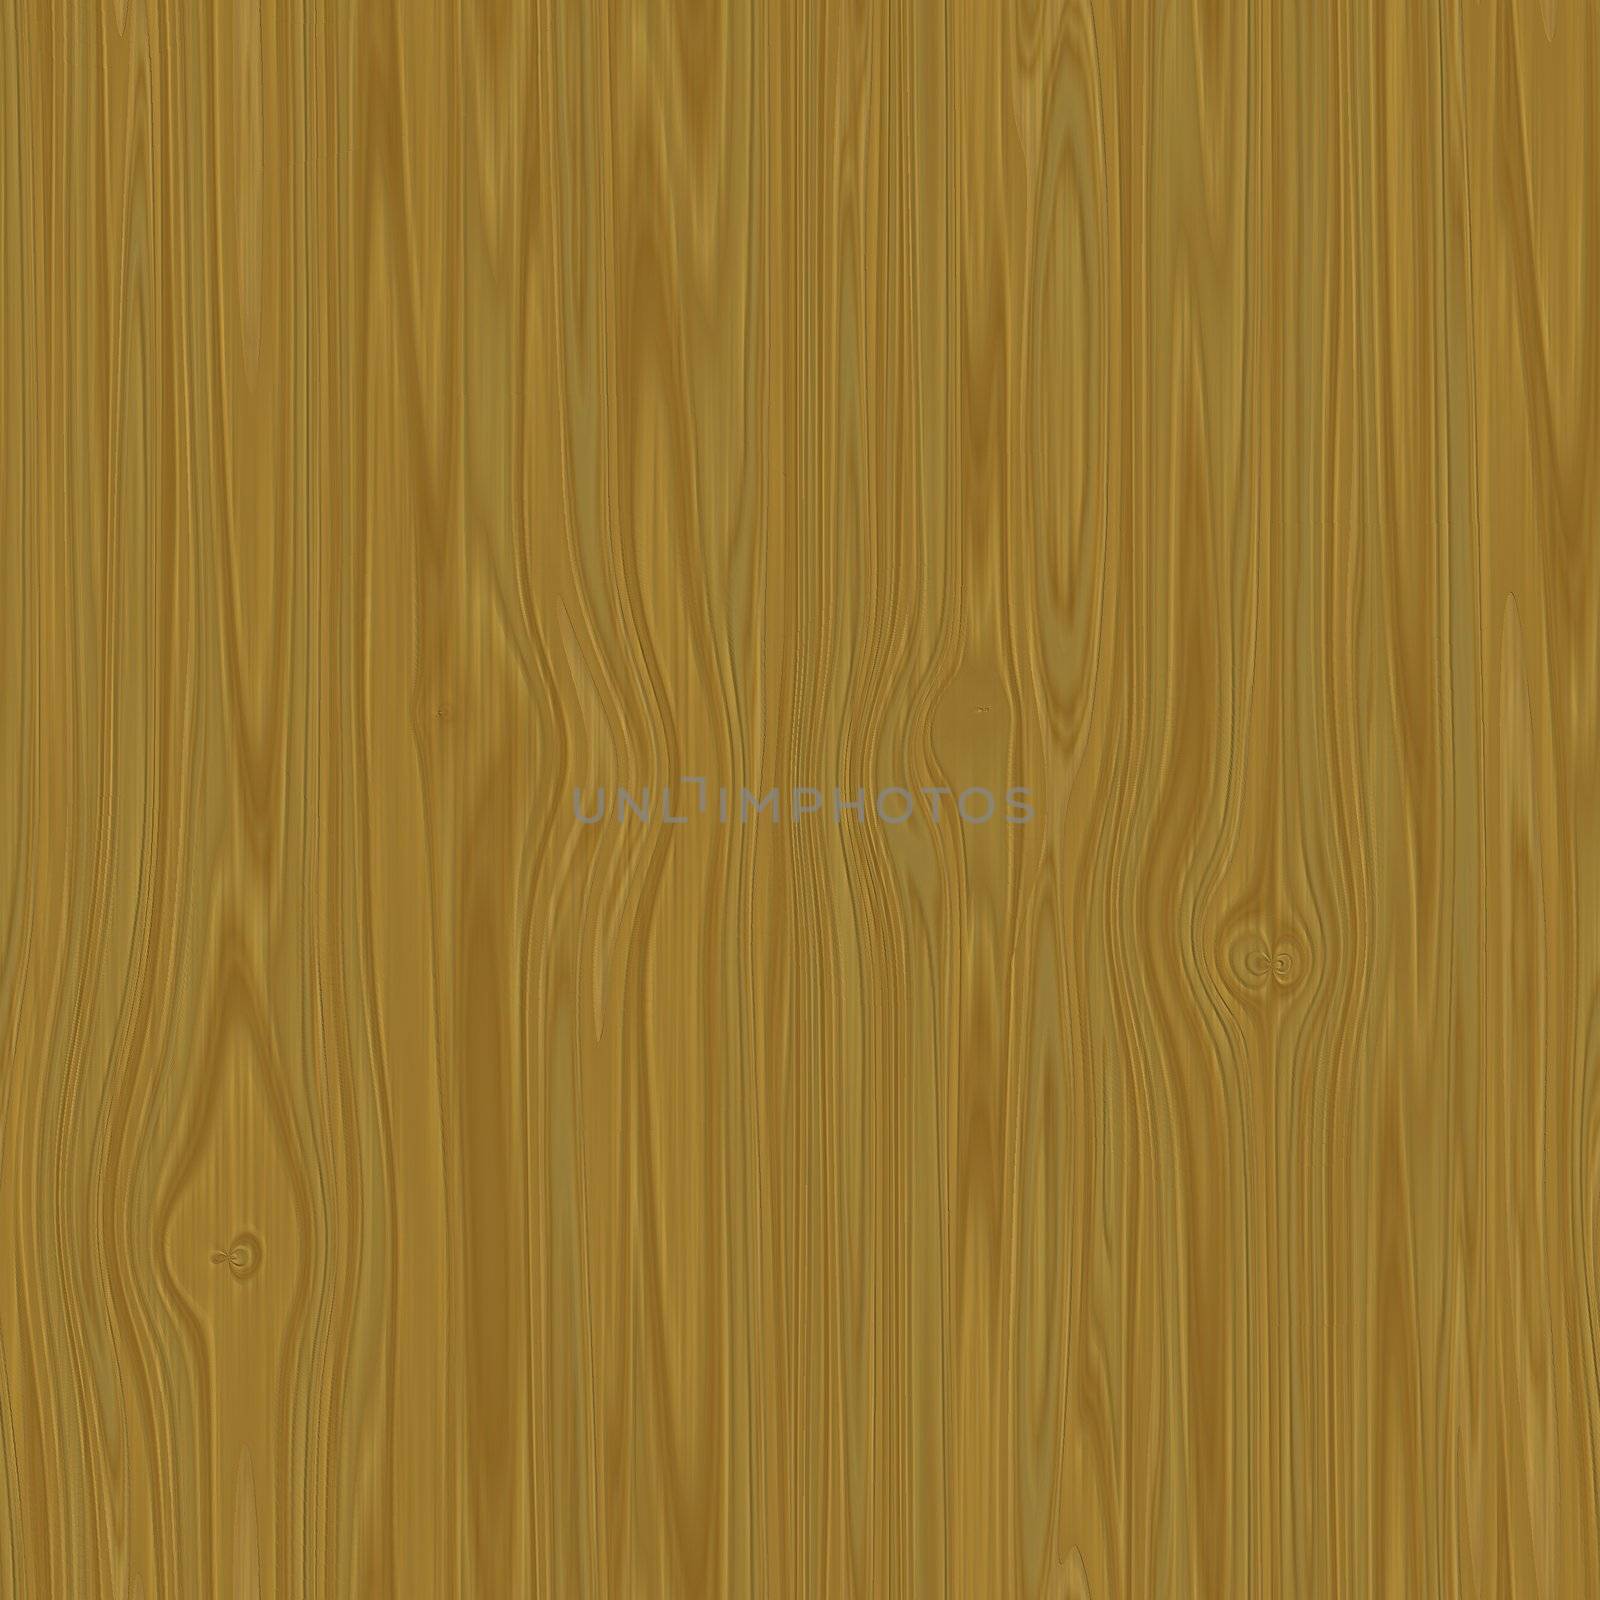 Wood Background by kentoh